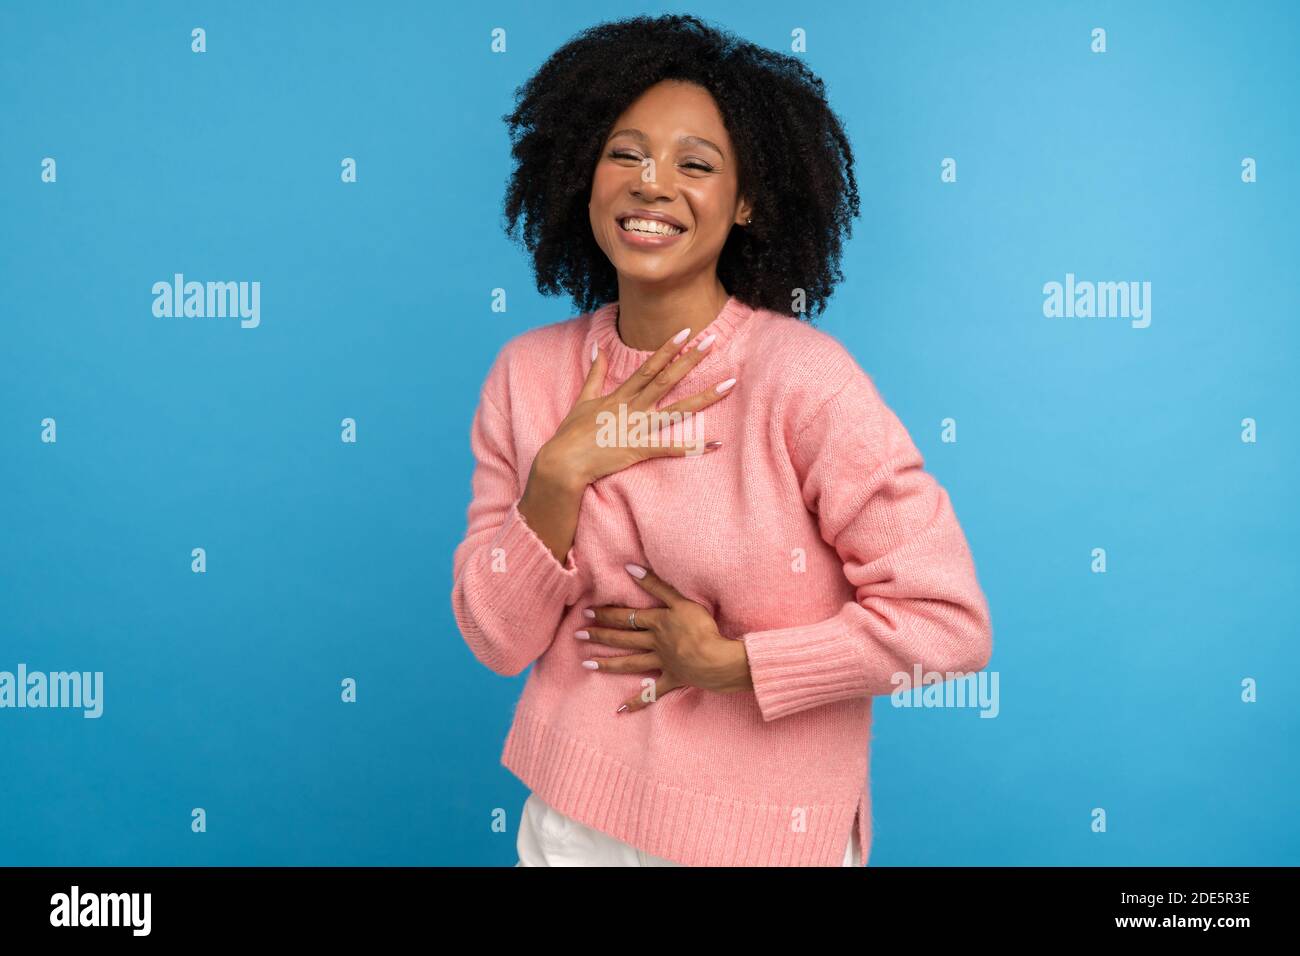 Laughing mixed race millennial woman with curly hair in casual pink jumper, keeps hand on chest, having fun, isolated on studio blue background. Overj Stock Photo